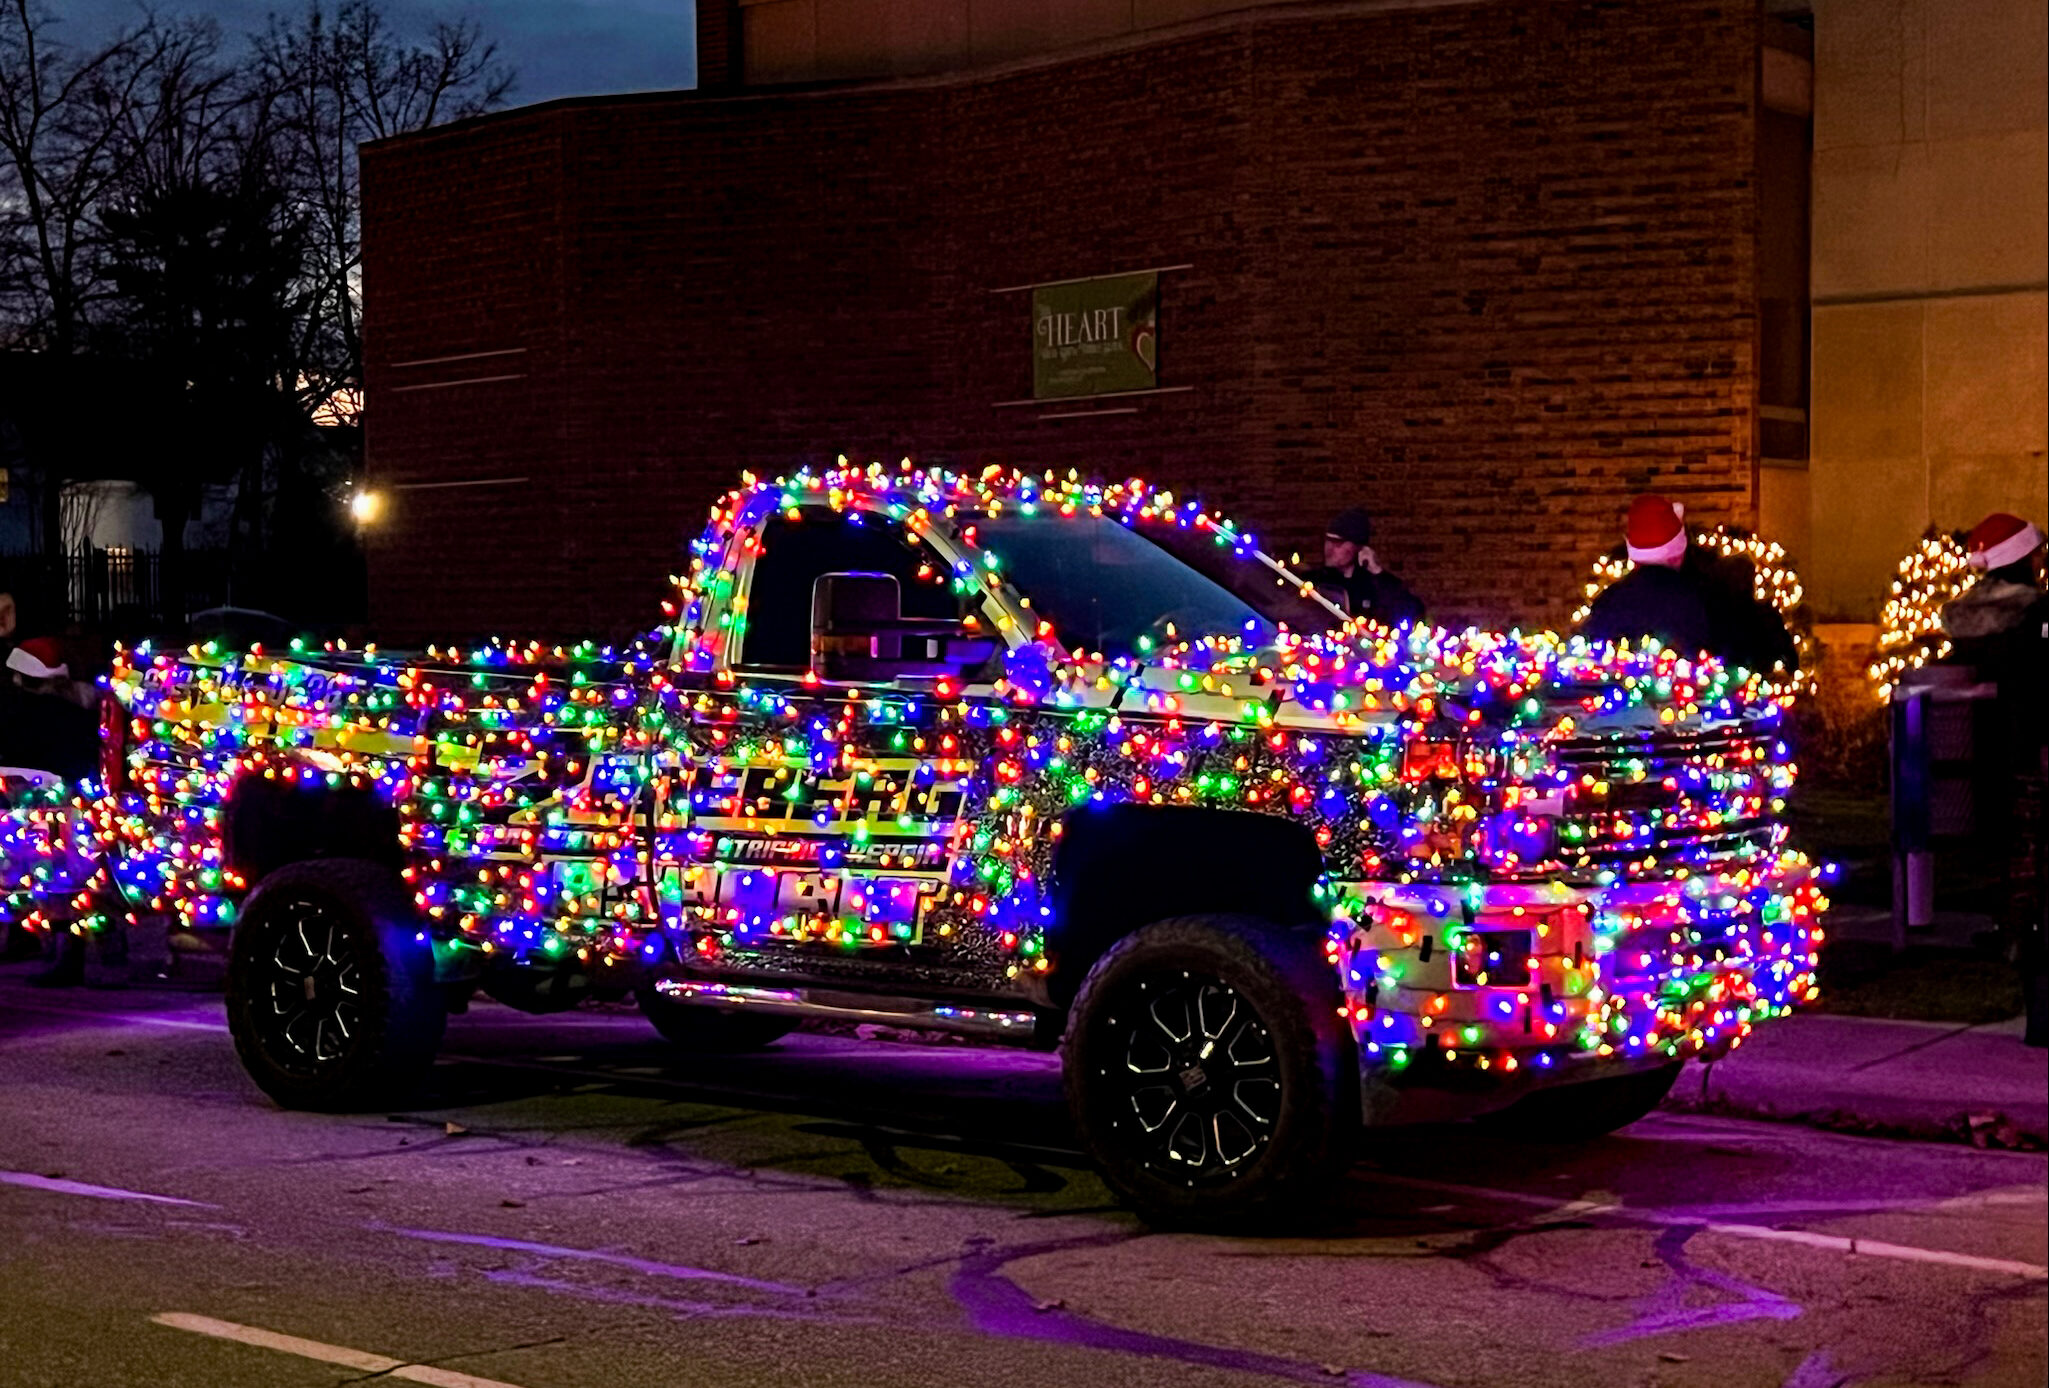 Lighted truck during the Mt. Pleasant Christmas Celebration parade.